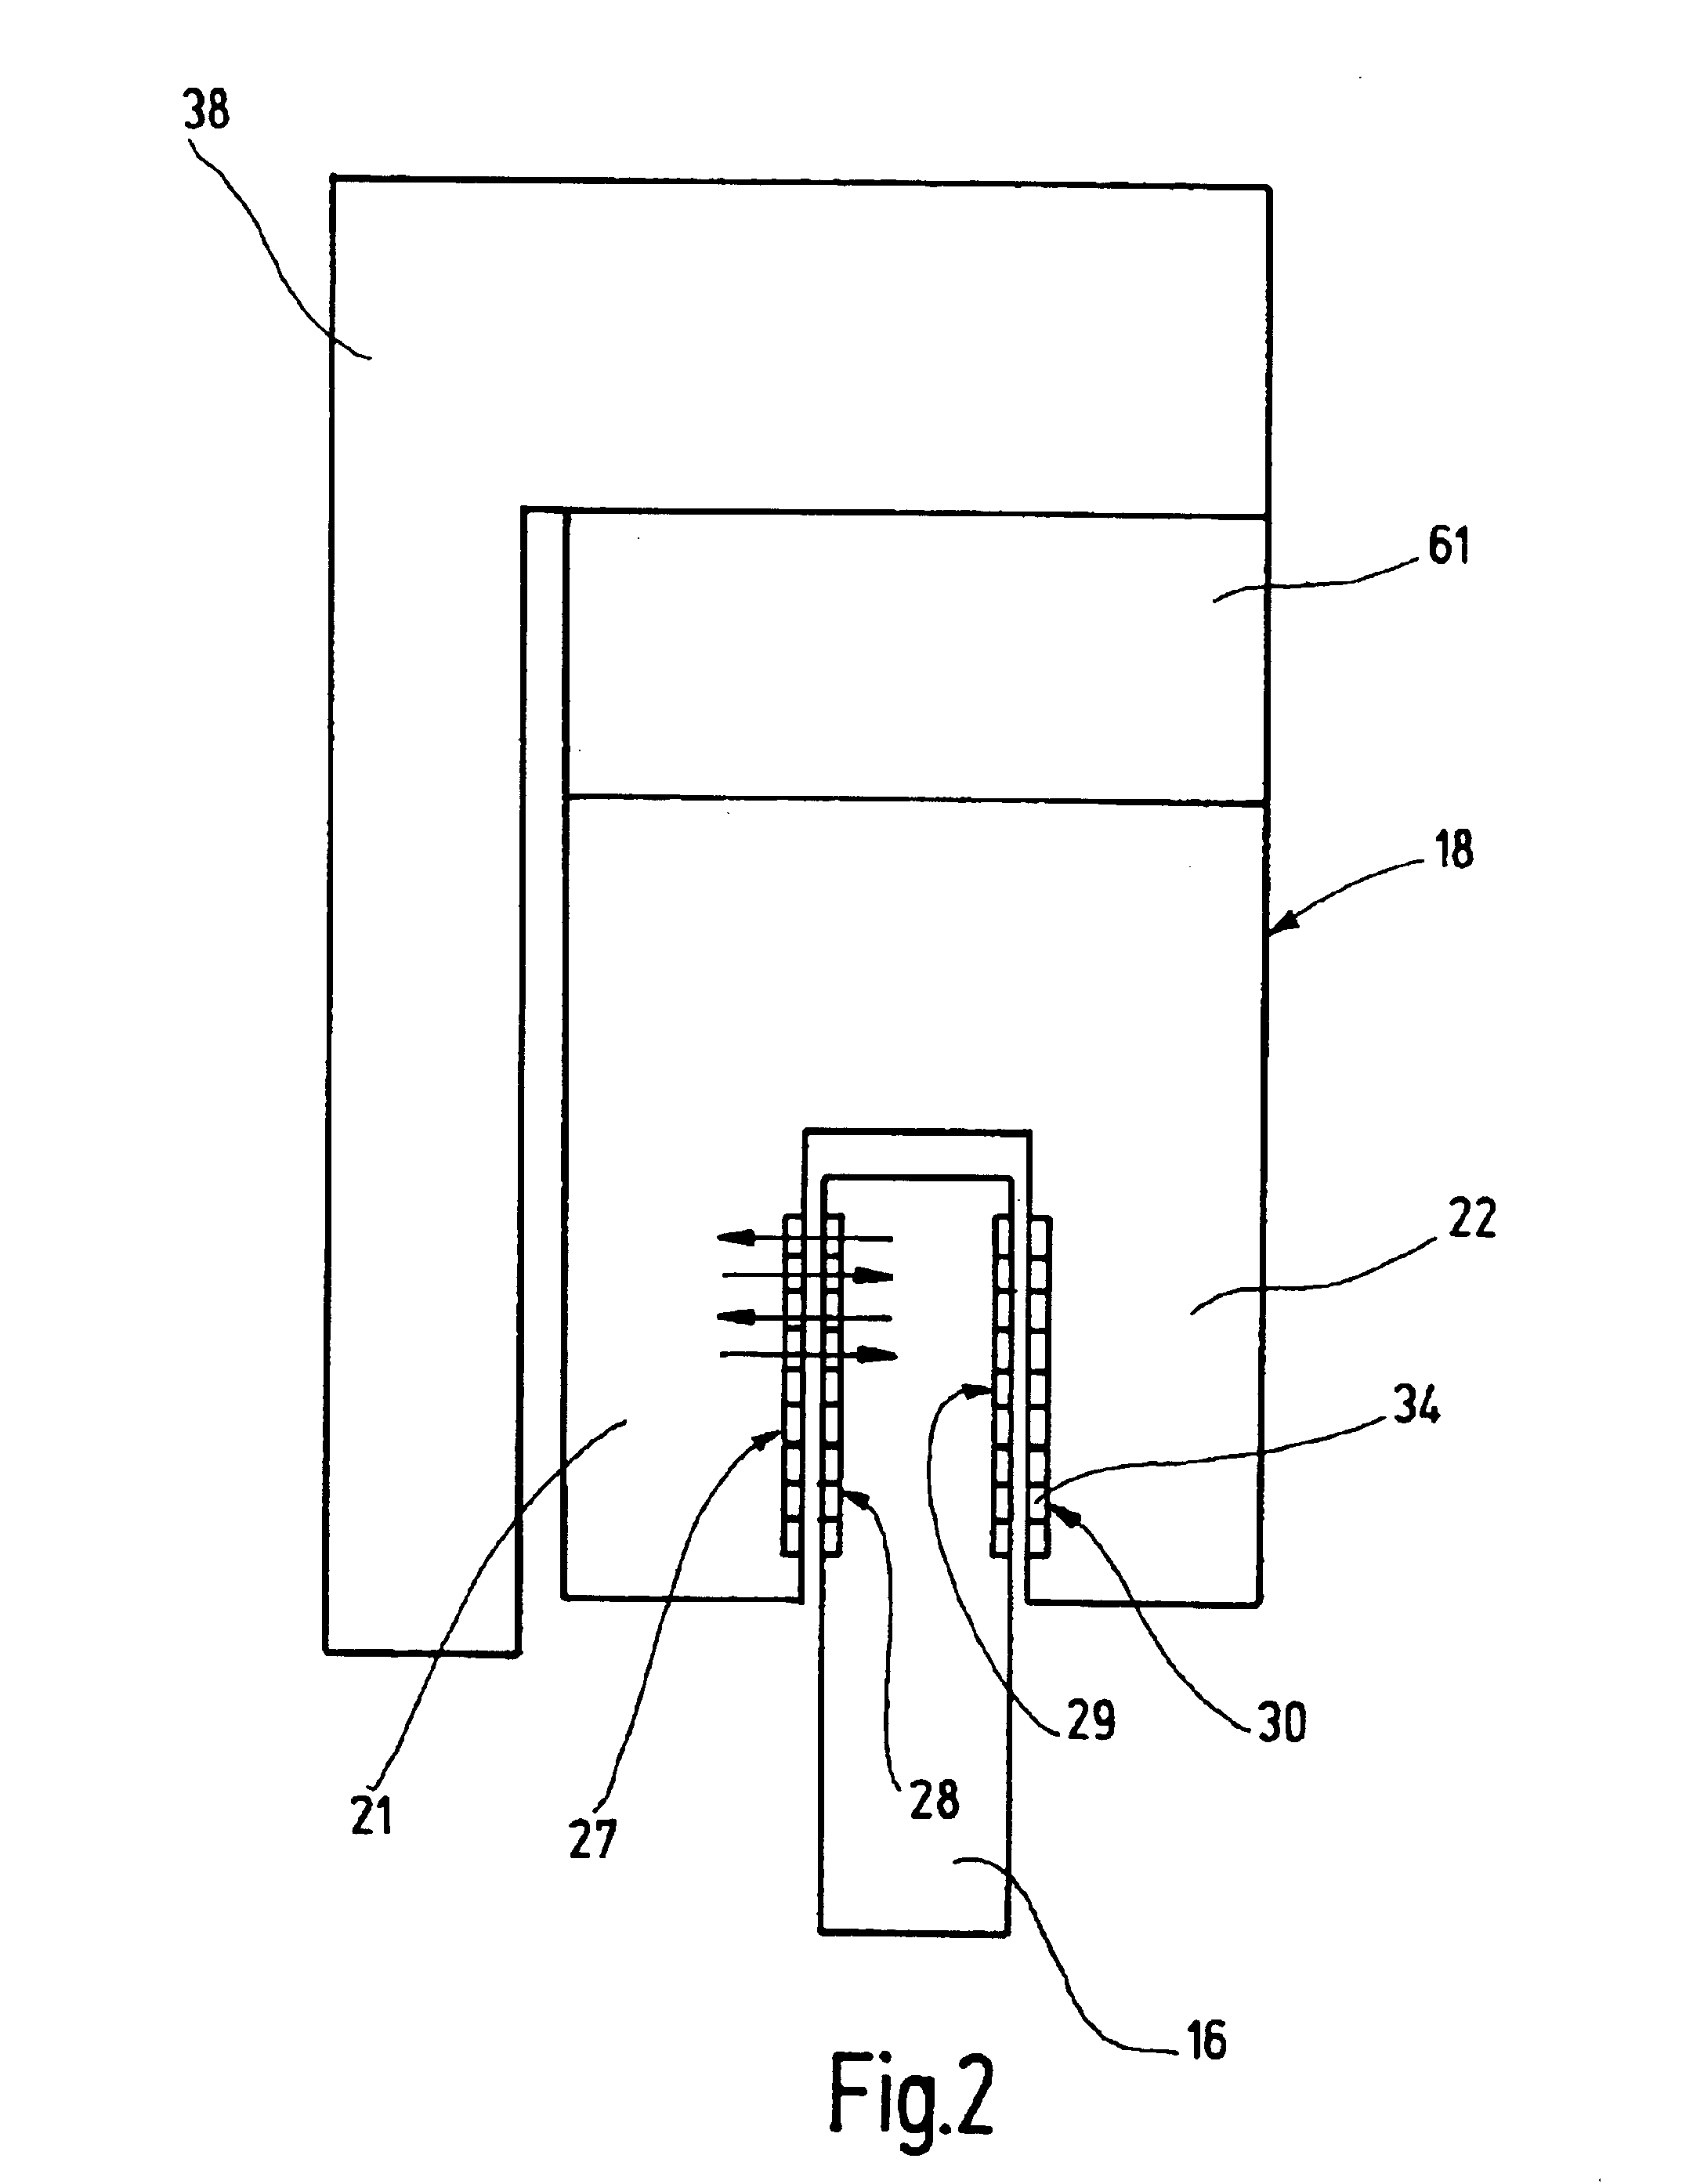 Turbocharger with magnetic bearing system that includes dampers